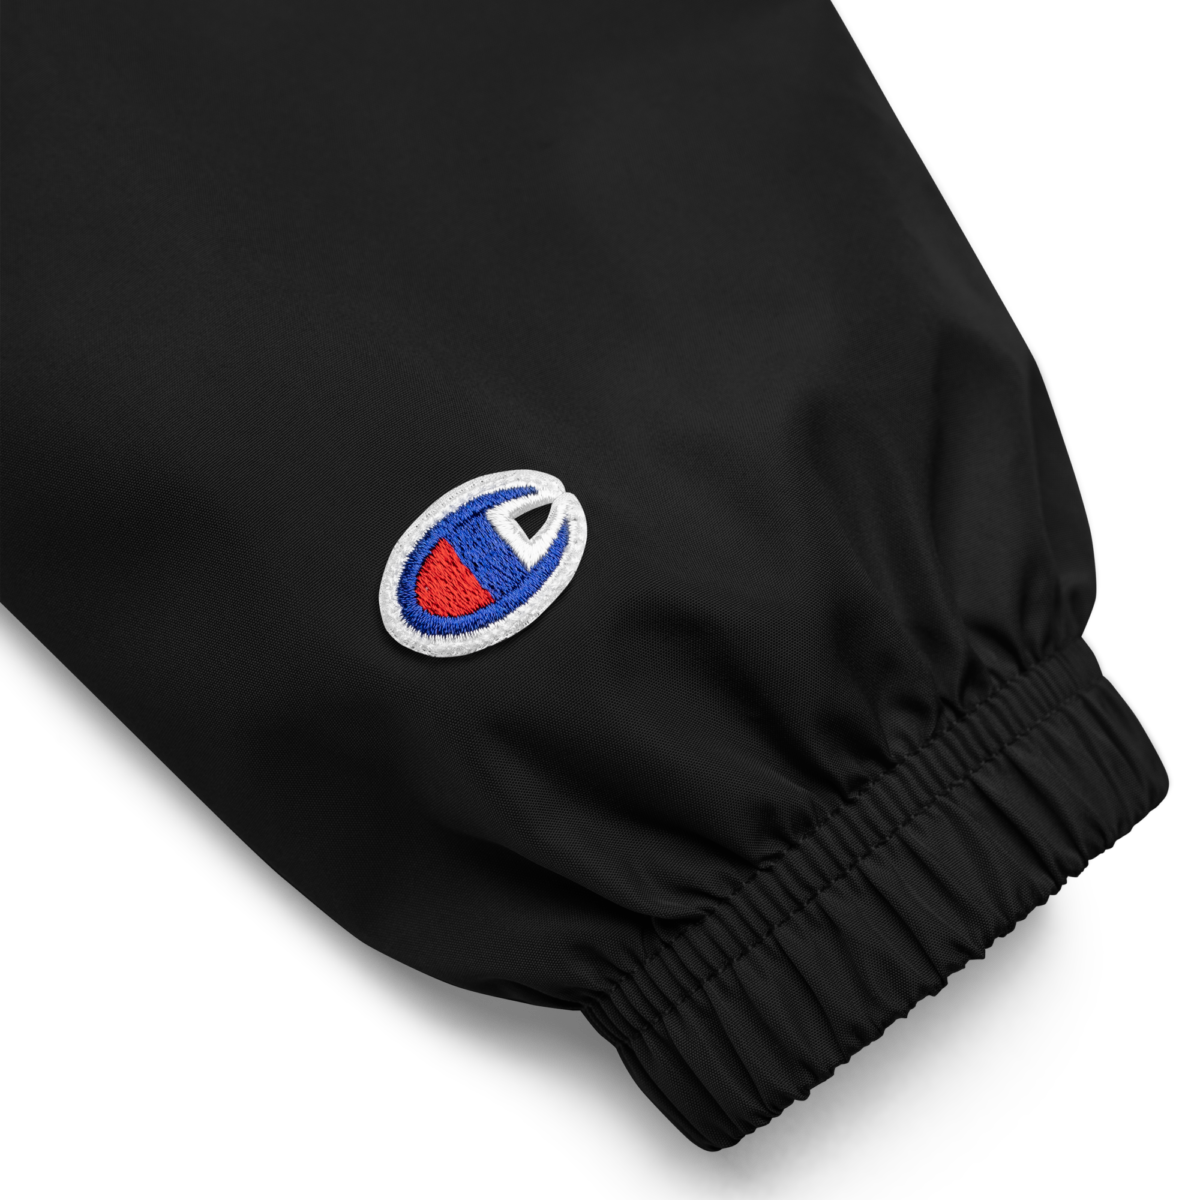 embroidered champion packable jacket black product details 631f401a84d61 - Binance (BNB) Champion Packable Jacket